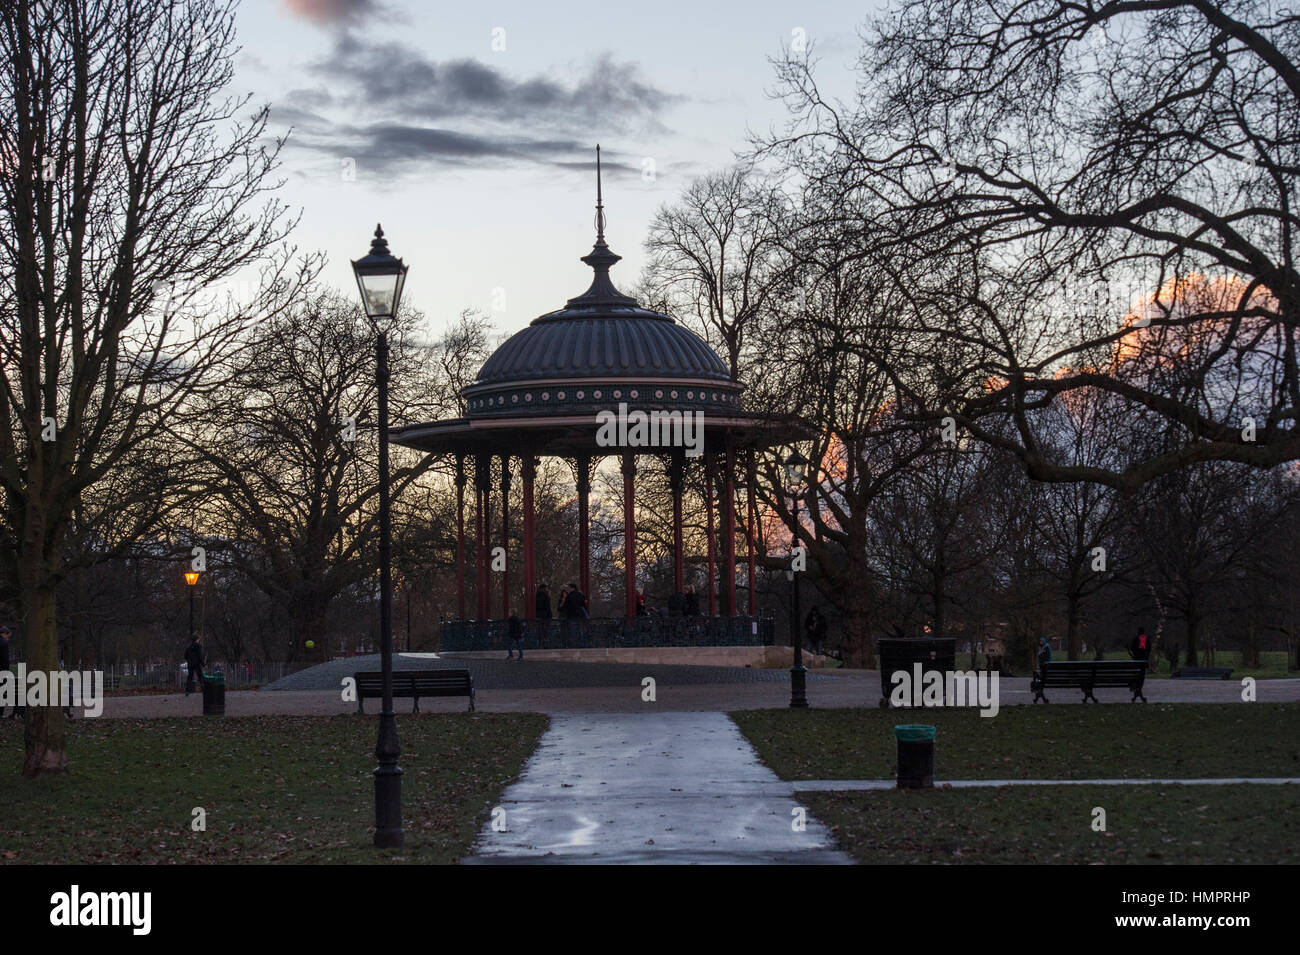 Clapham Common Bandstand in the winter Stock Photo